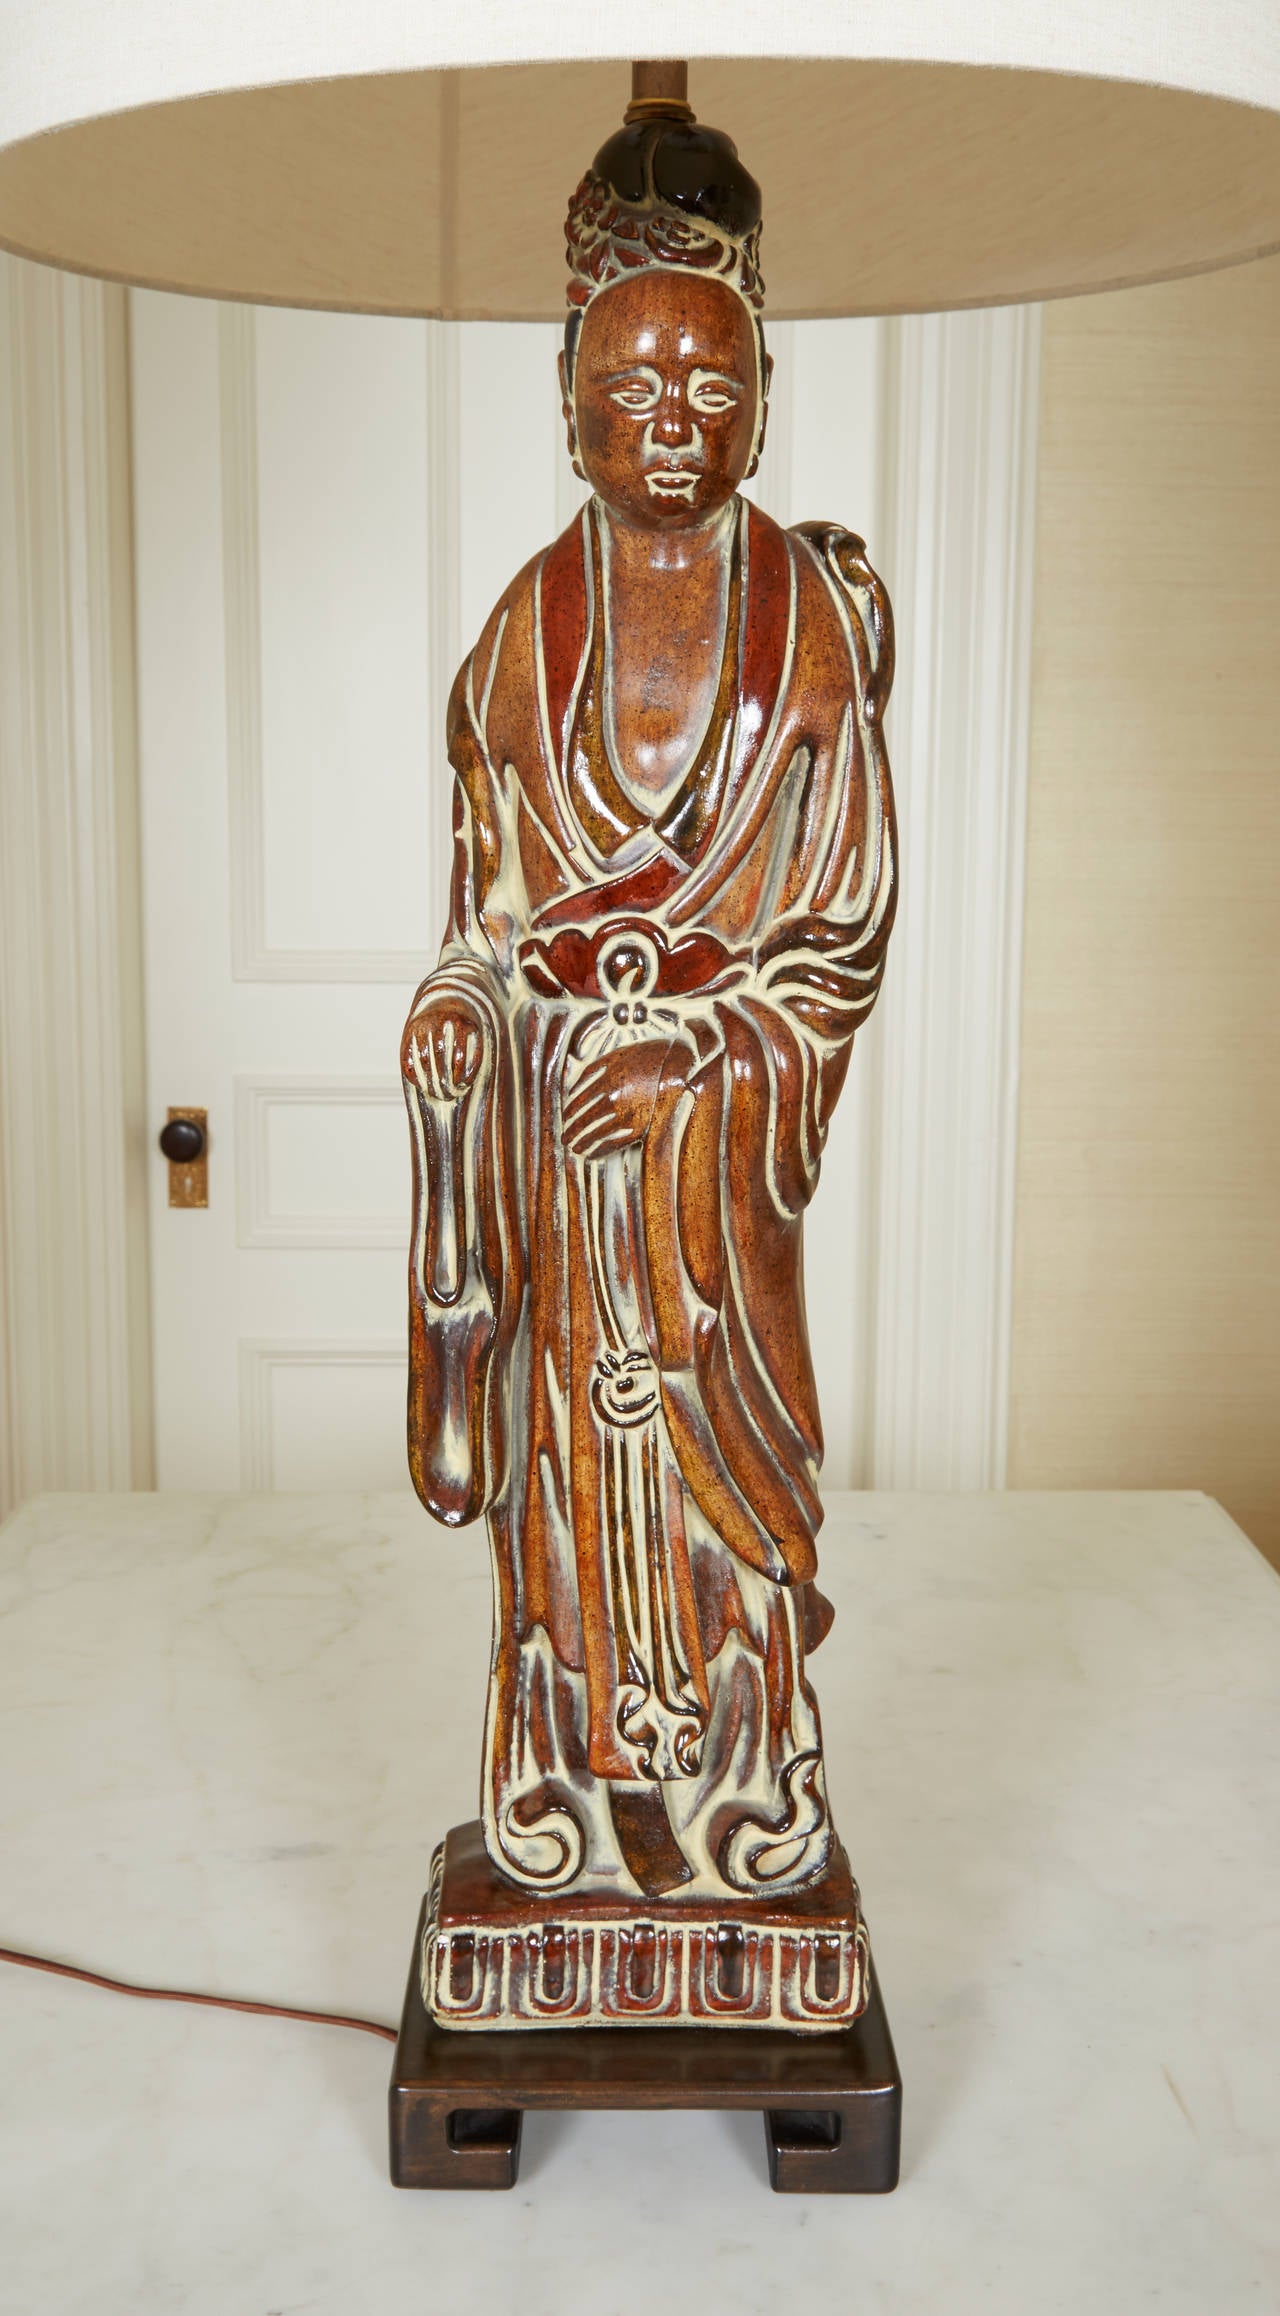 Comprising a pair of male and female court figures glazed in a cinnabar color; on ebonized wood bases. With custom linen shades by Blanche P. Field. Height of figures alone is 29